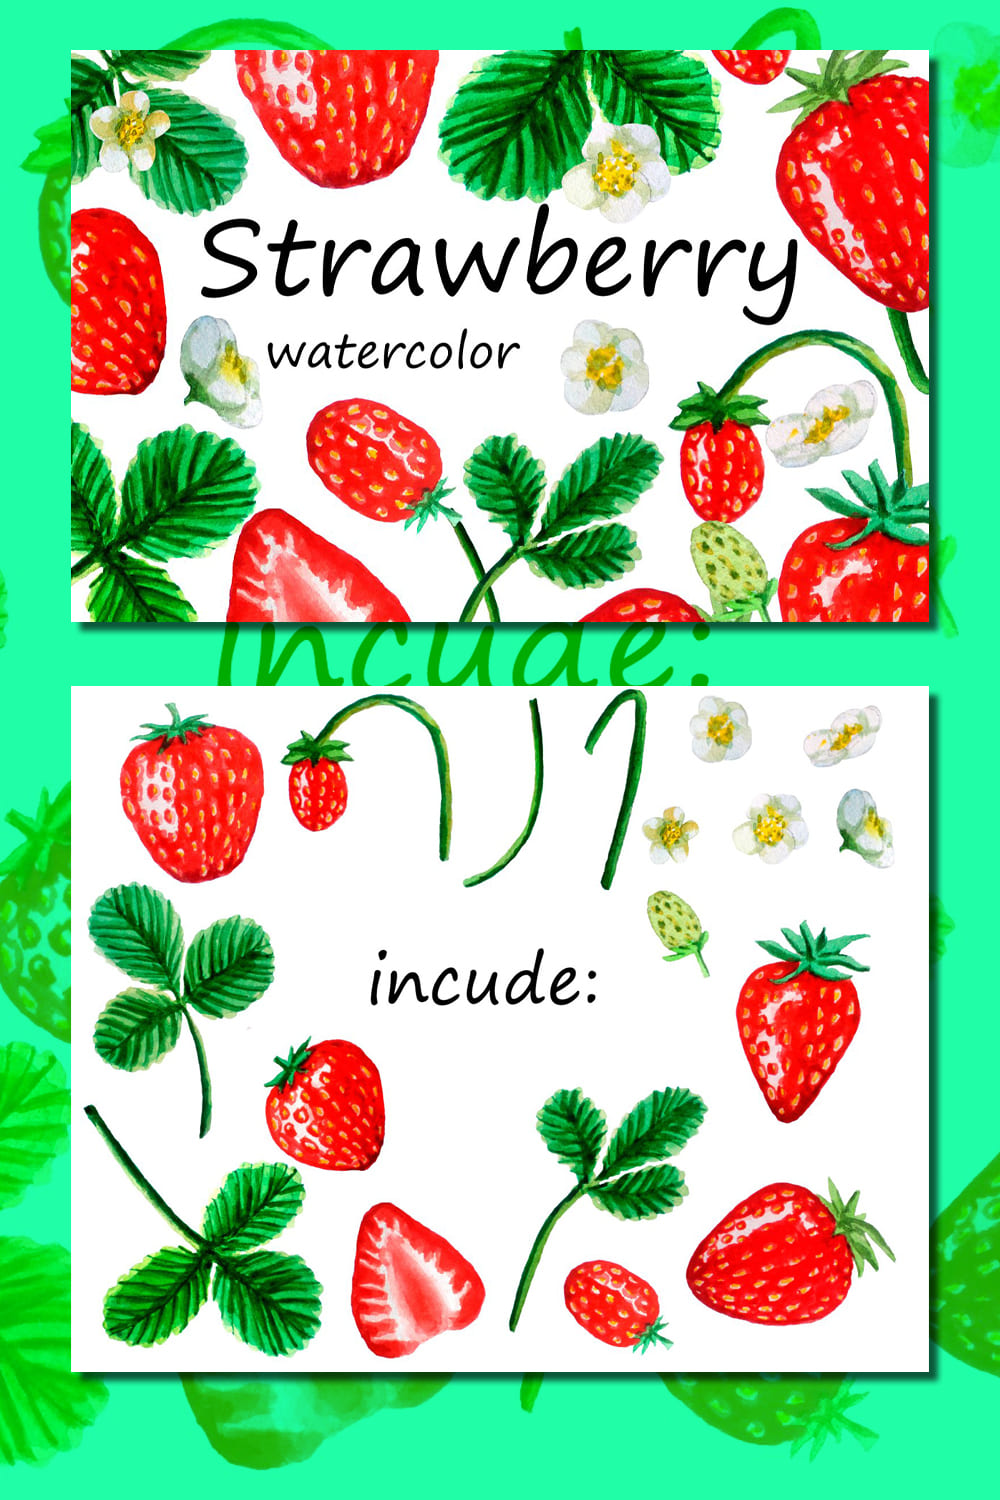 One slide with watercolor strawberry composition, another slide with watercolor strawberry elements.